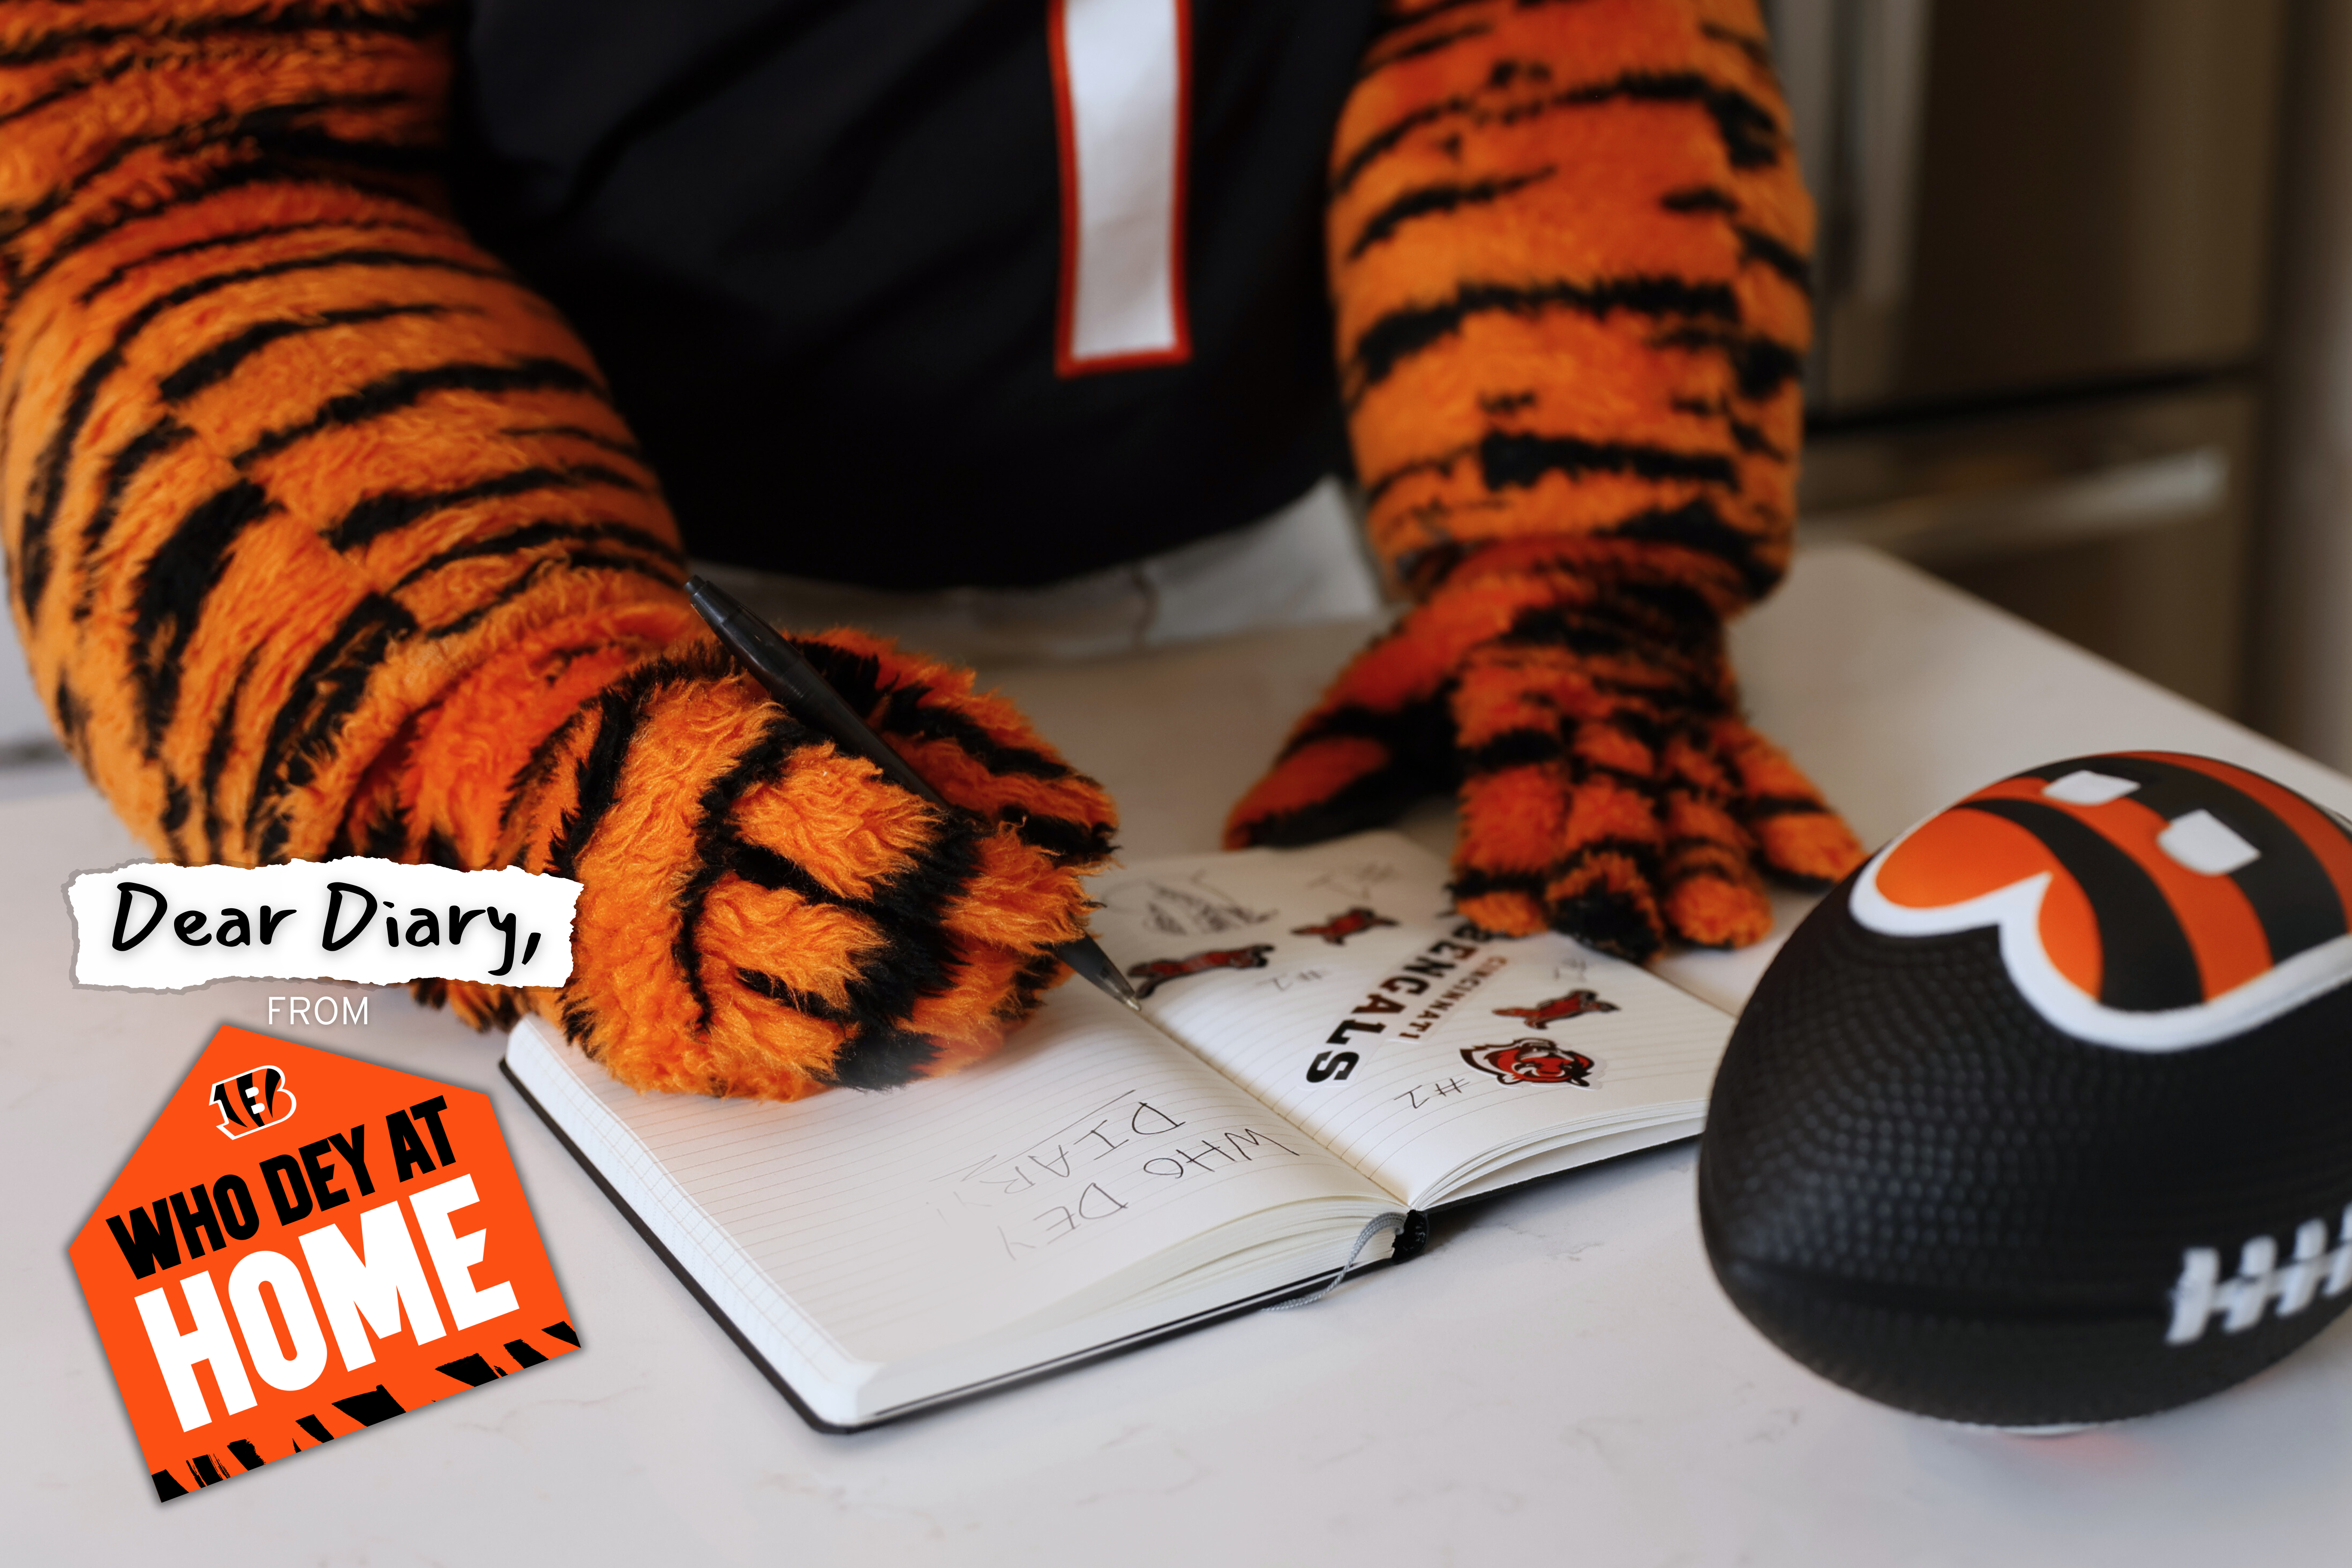 Dear Diary from Who Dey at Home